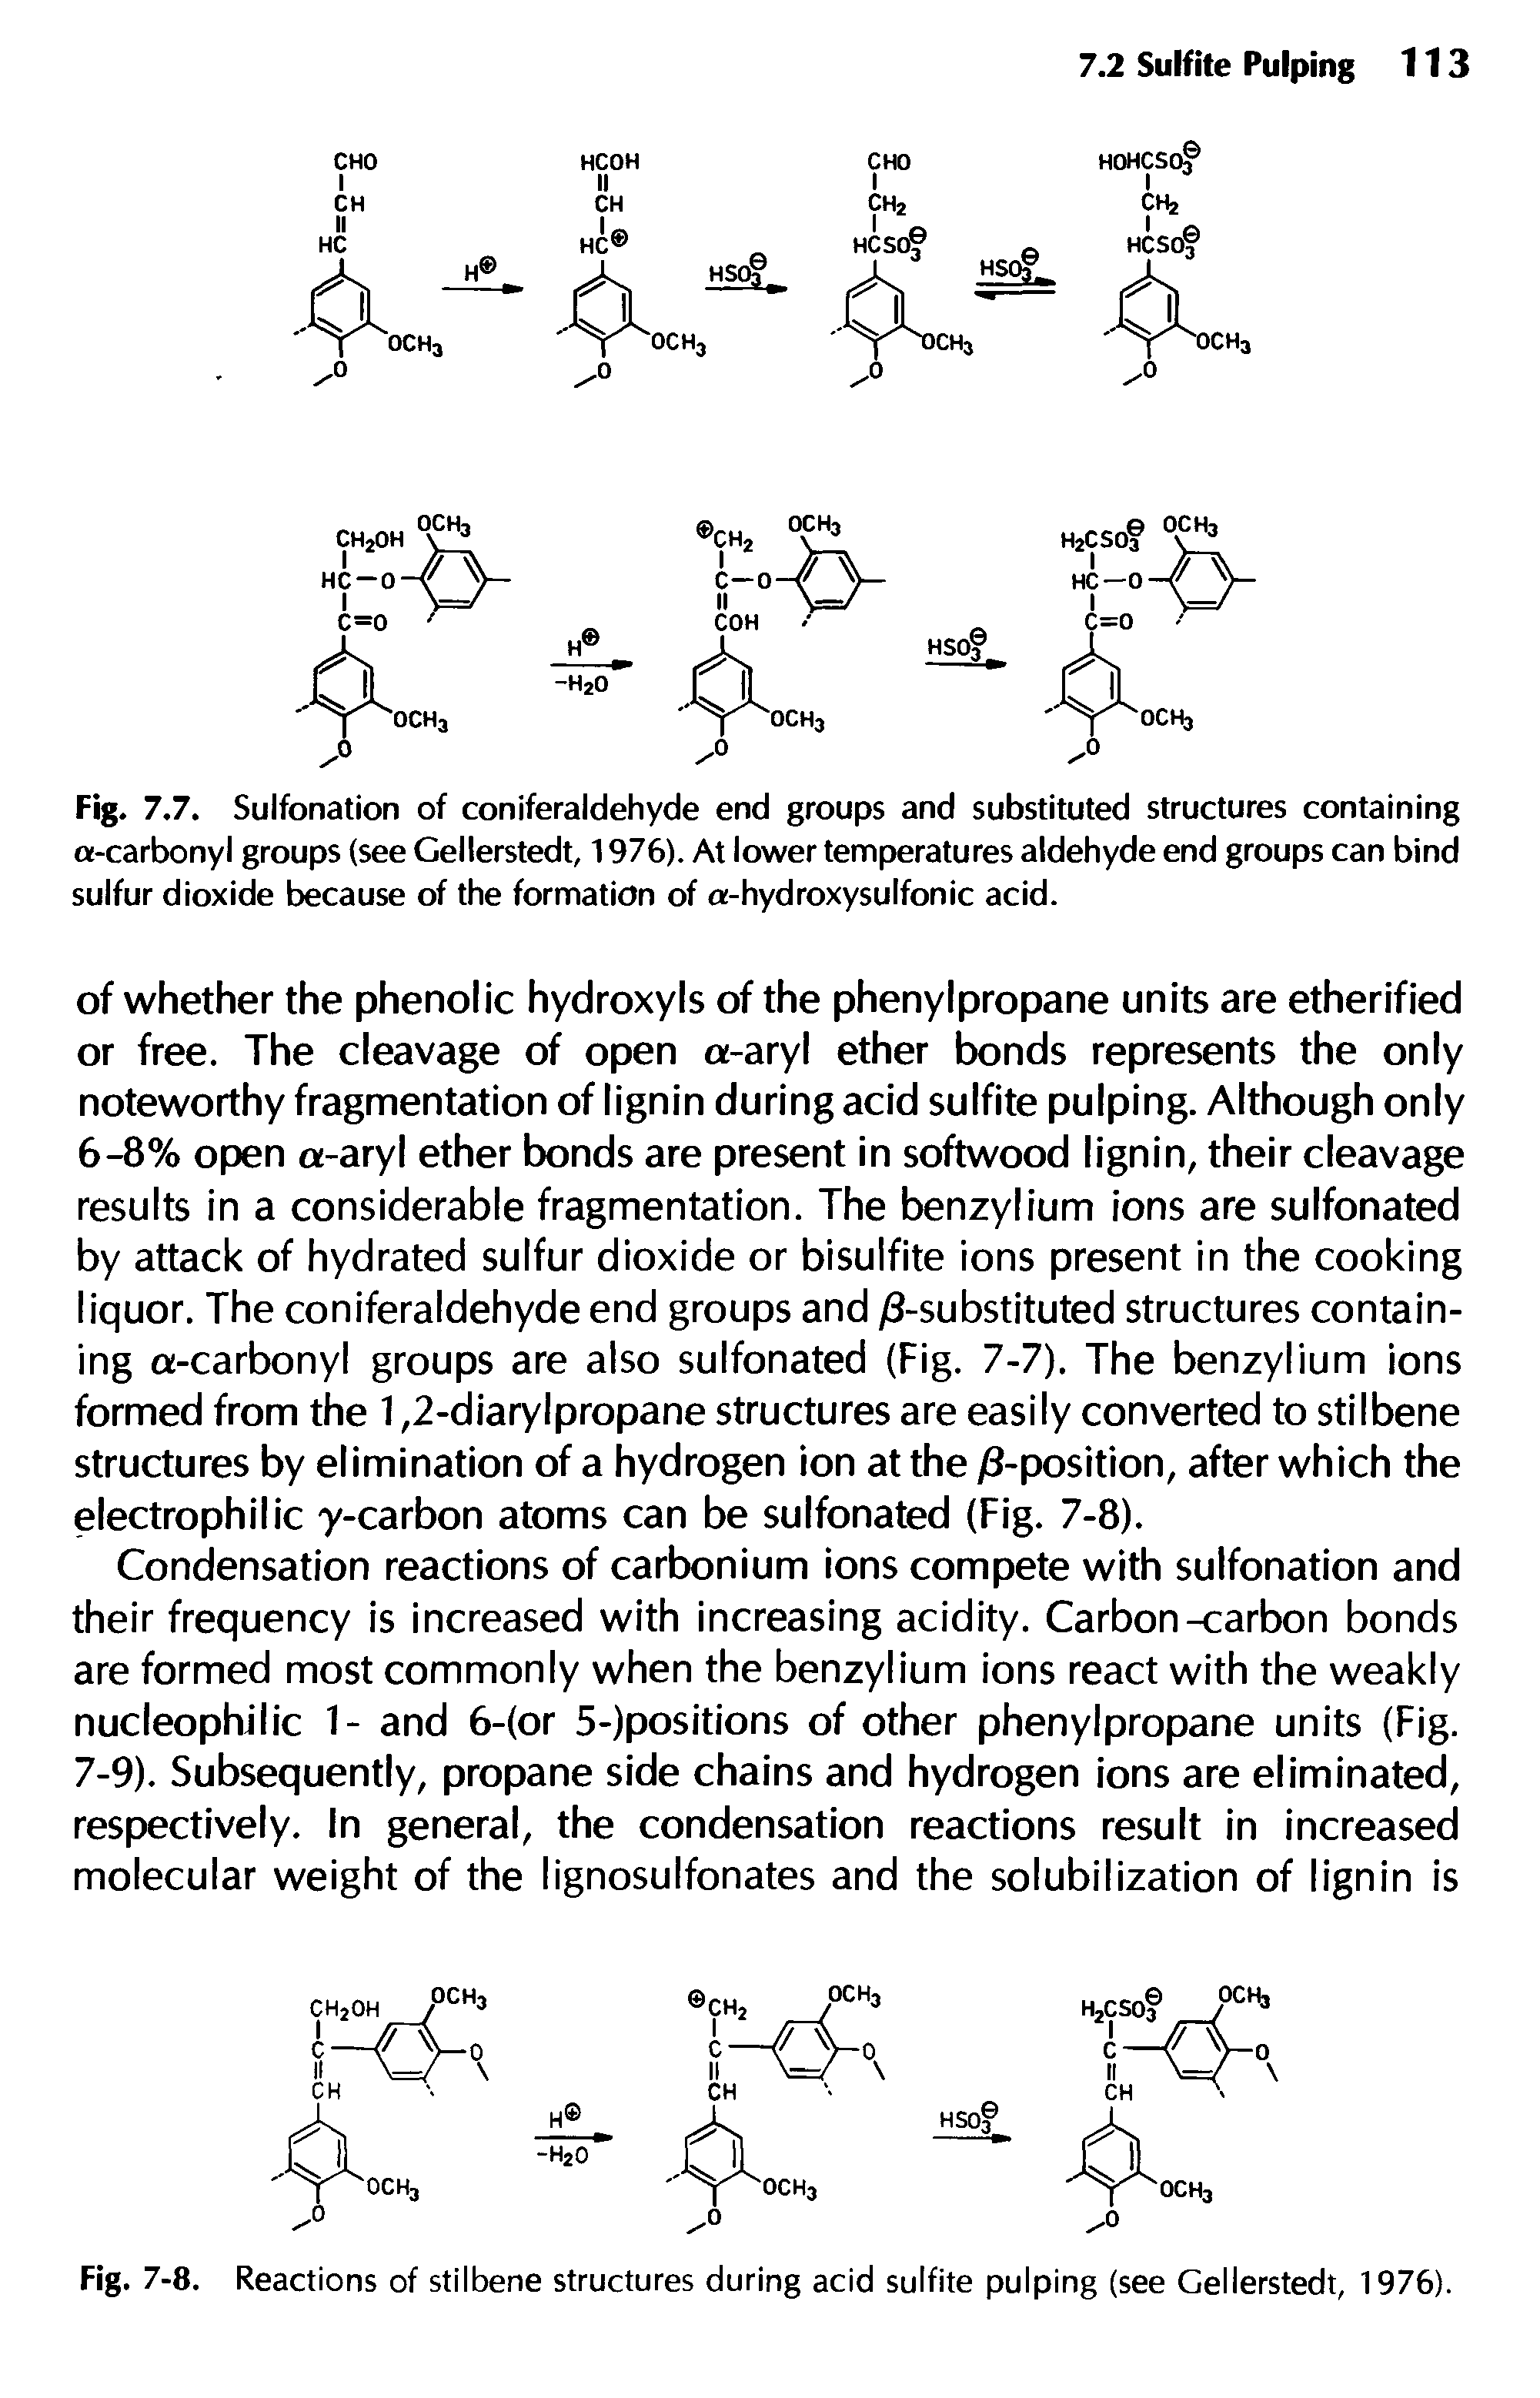 Fig. 7.7. Sulfonation of coniferaldehyde end groups and substituted structures containing a-carbonyl groups (see Gellerstedt, 1976). At lower temperatures aldehyde end groups can bind sulfur dioxide because of the formation of a-hydroxysulfonic acid.